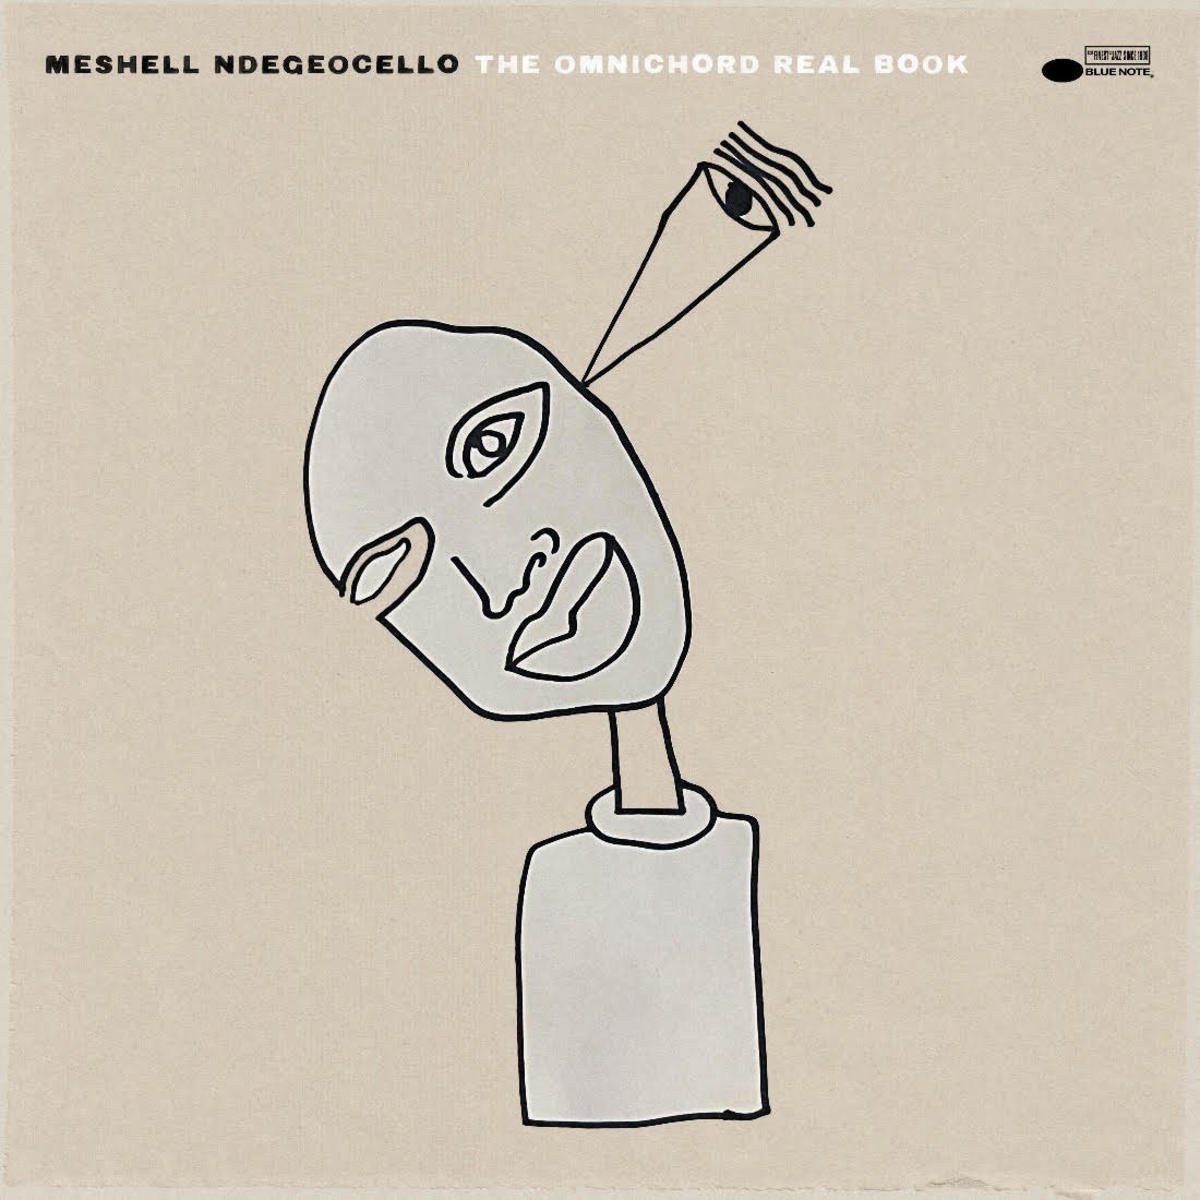 Meshell Ndegeocello | 'The Omnichord Real Book'